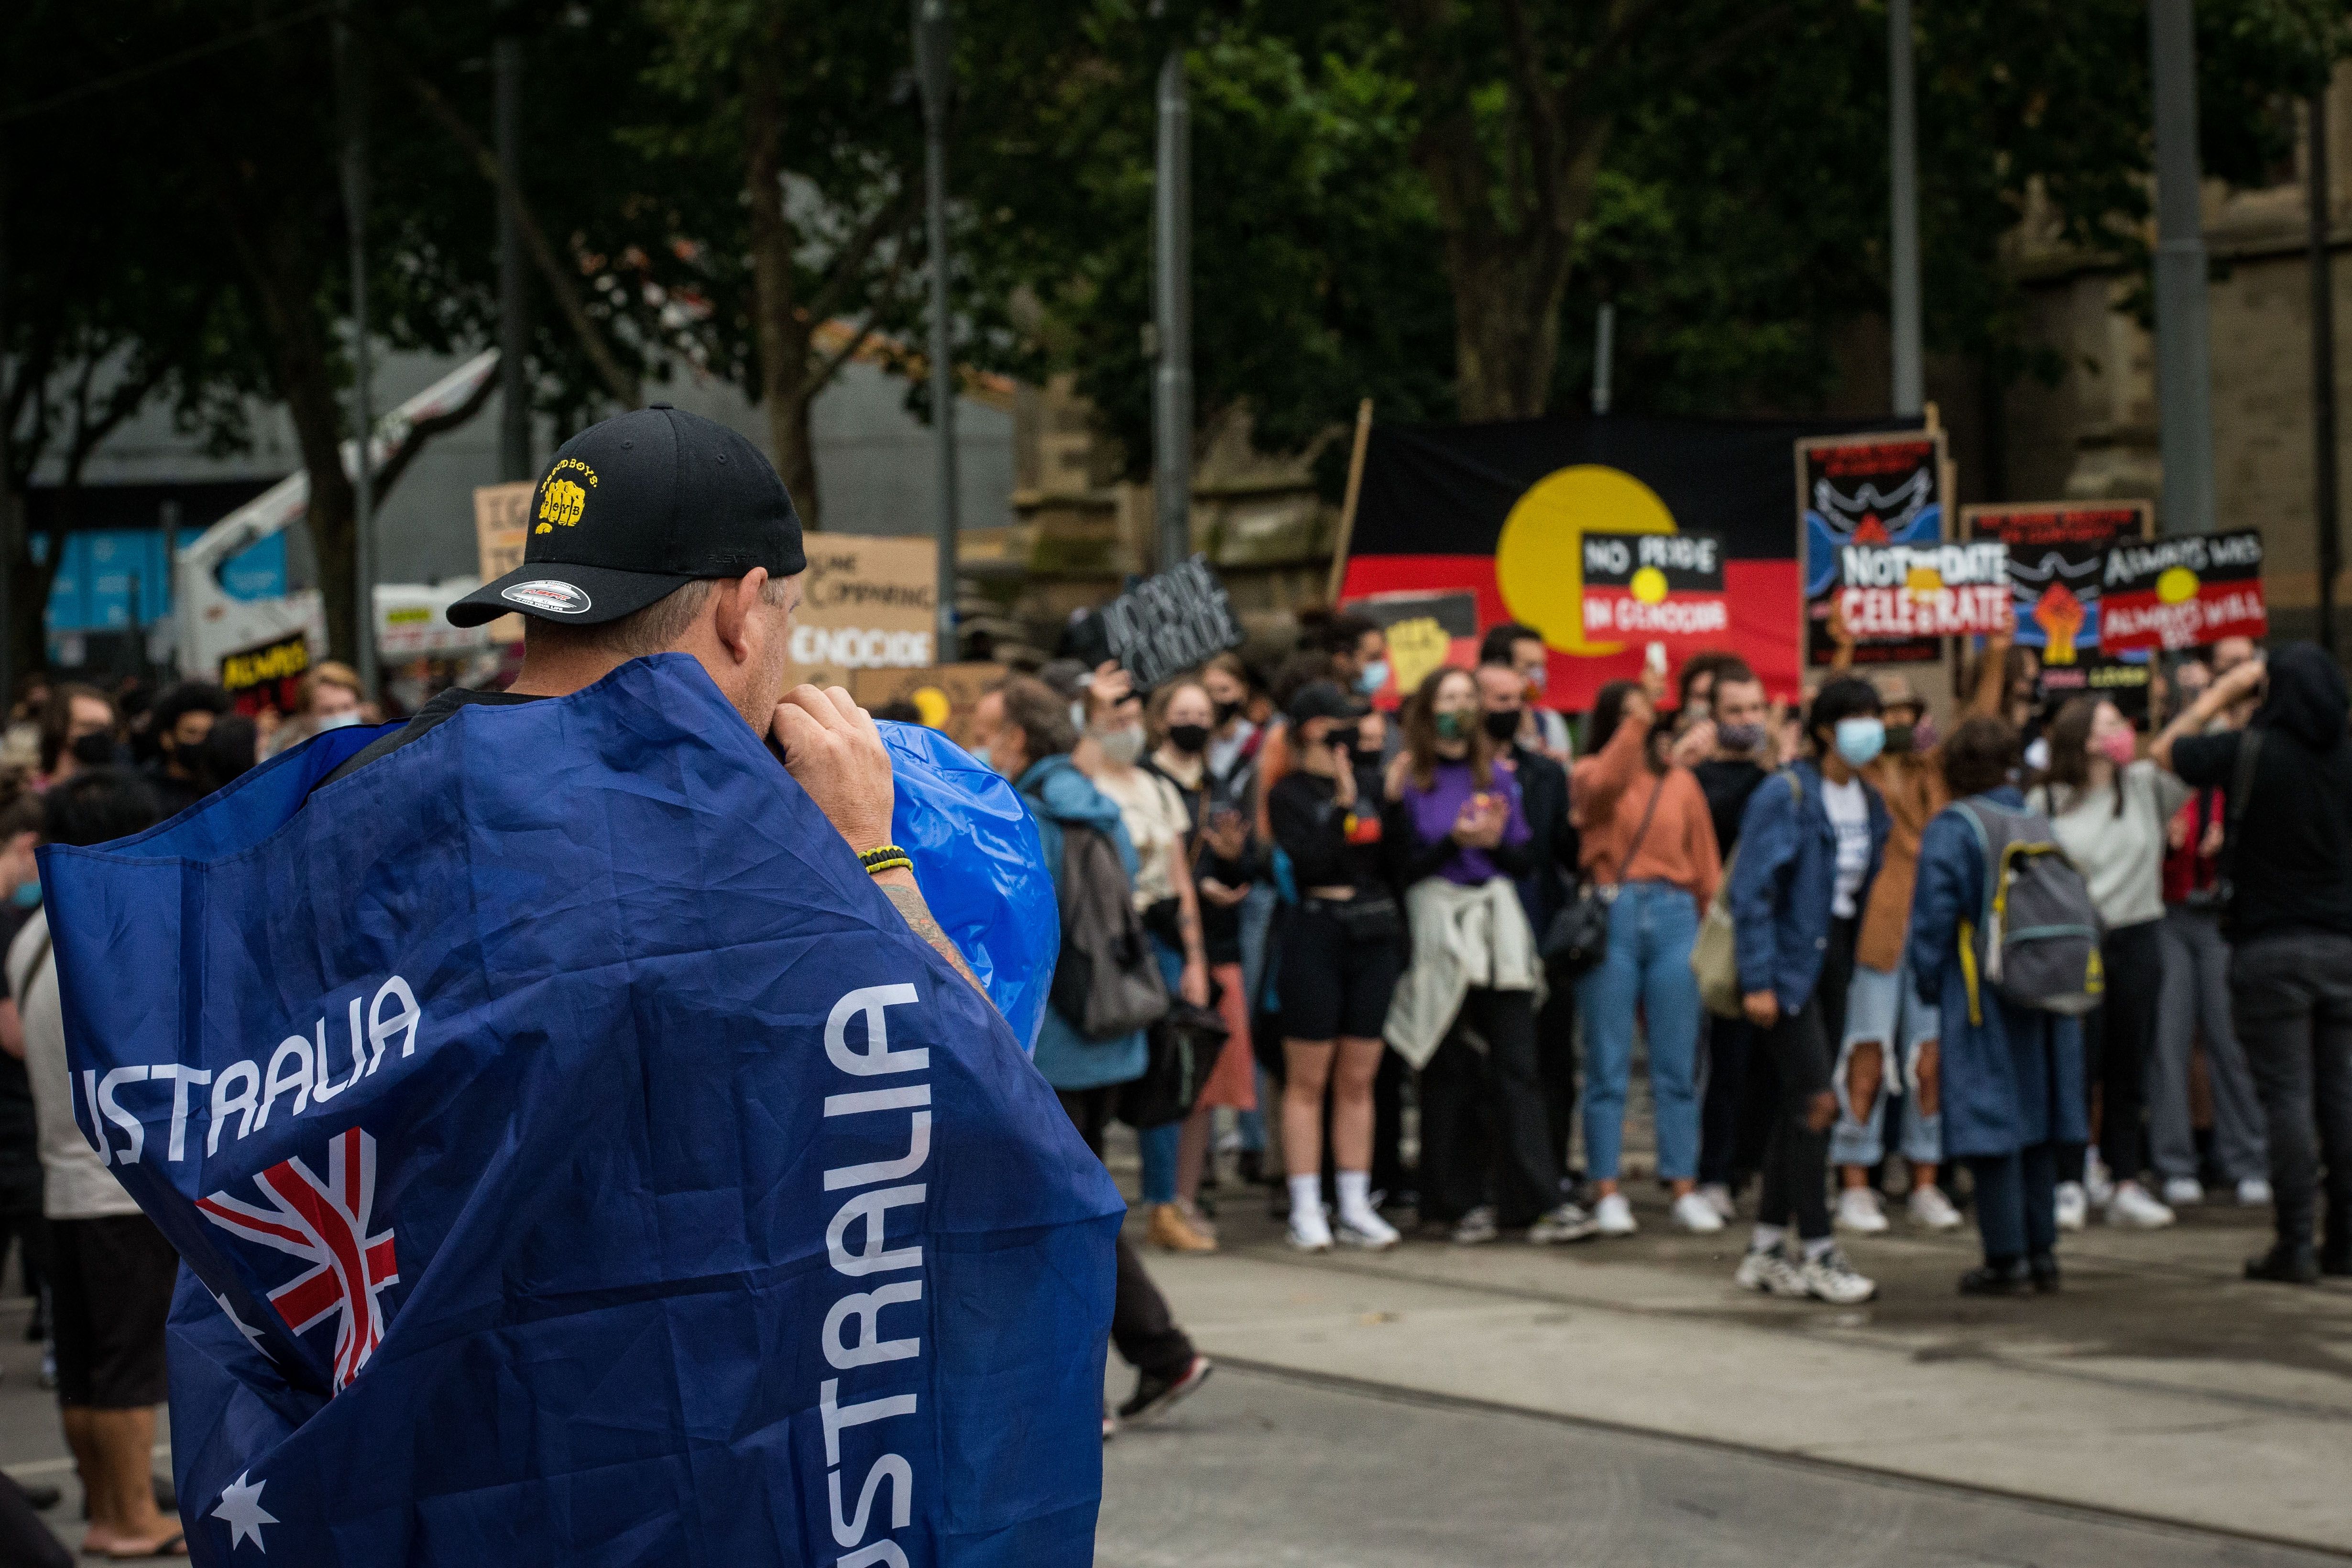 A man wearing a 'Proud Boys' shirt and an Australian flag attends the Invasion Day rally in the city on January 26, 2021 in Melbourne, Australia. 